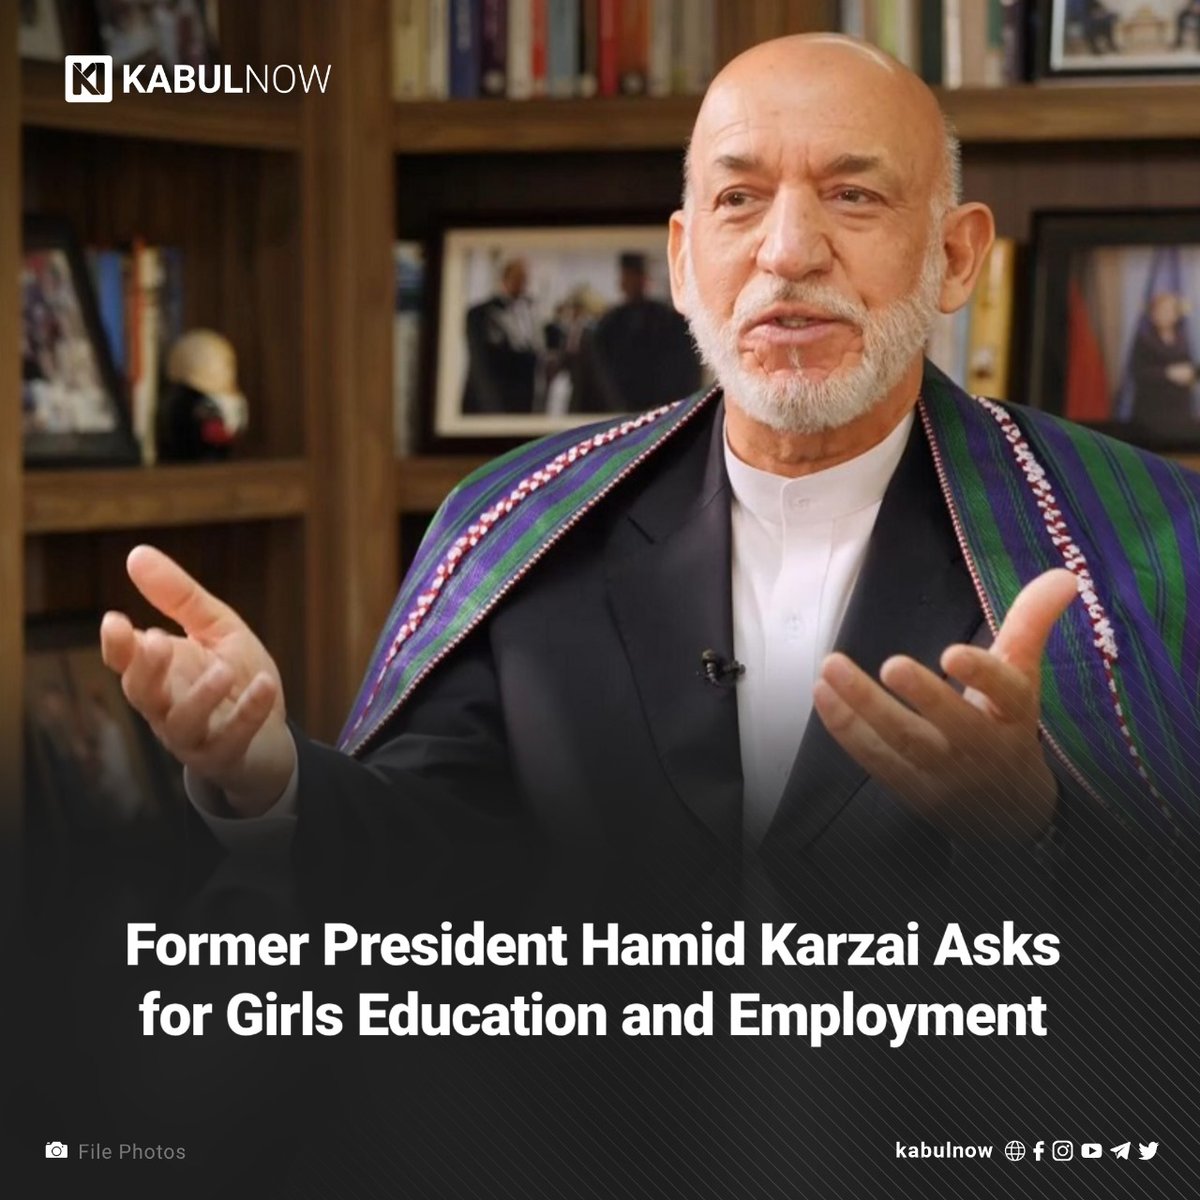 The former president of Afghanistan, Hamid Karzai, has reiterated his call for the Taliban to reopen schools and universities to female students and allow women to return to work. Read more: kabulnow.com/2024/04/35304/